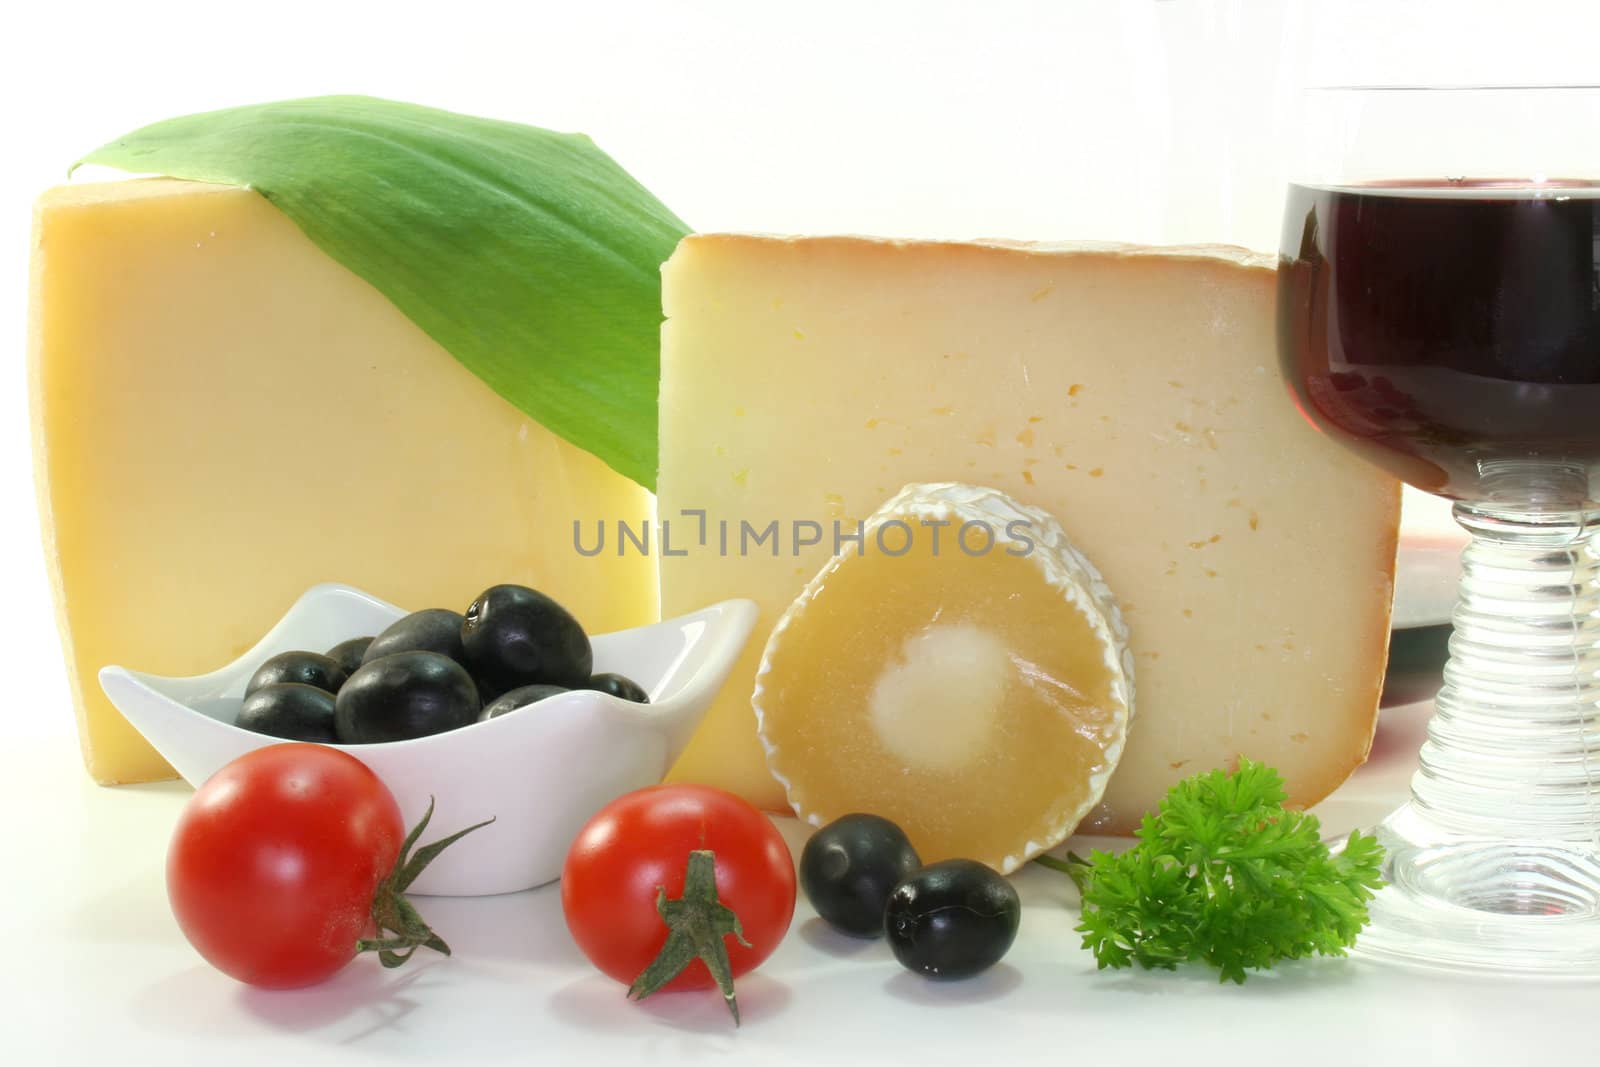 Cheese by silencefoto